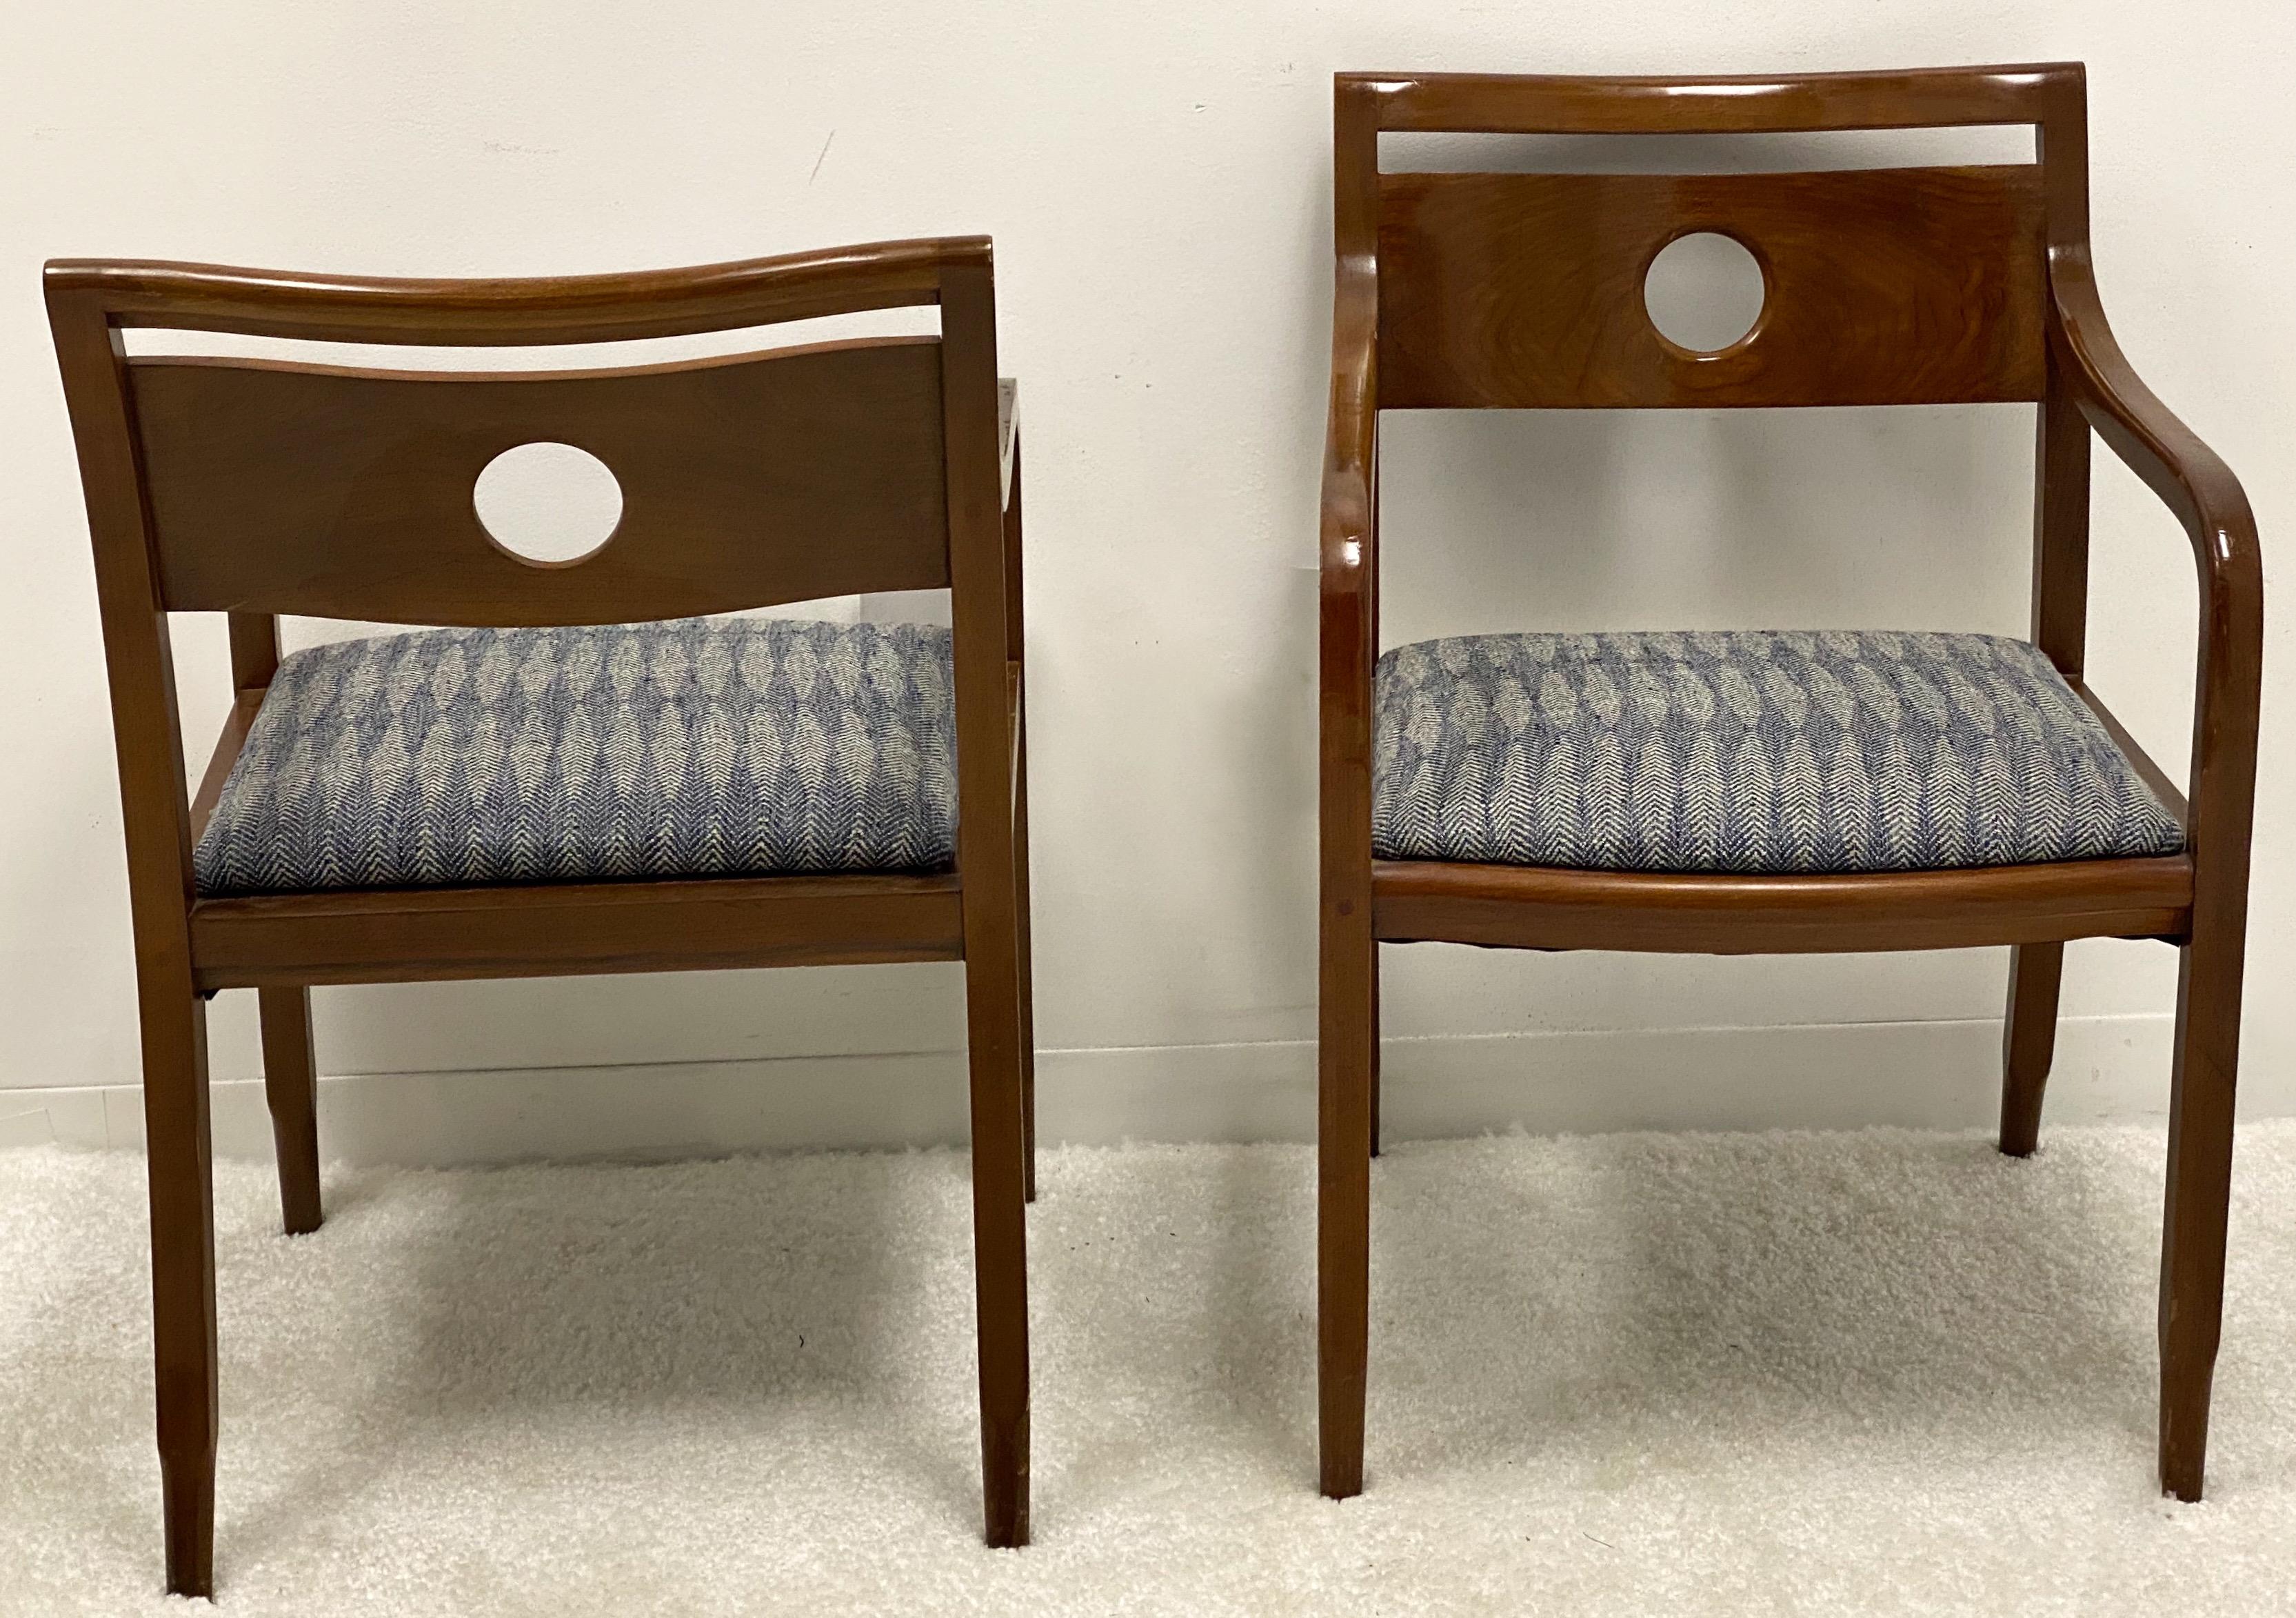 This is a pair of Mid-Century Modern mahogany Ward Bennett bent wood arm chairs. They are marked with the red metal tag, and there are two pairs available. The fabric is navy and cream herringbone and is in very good condition.